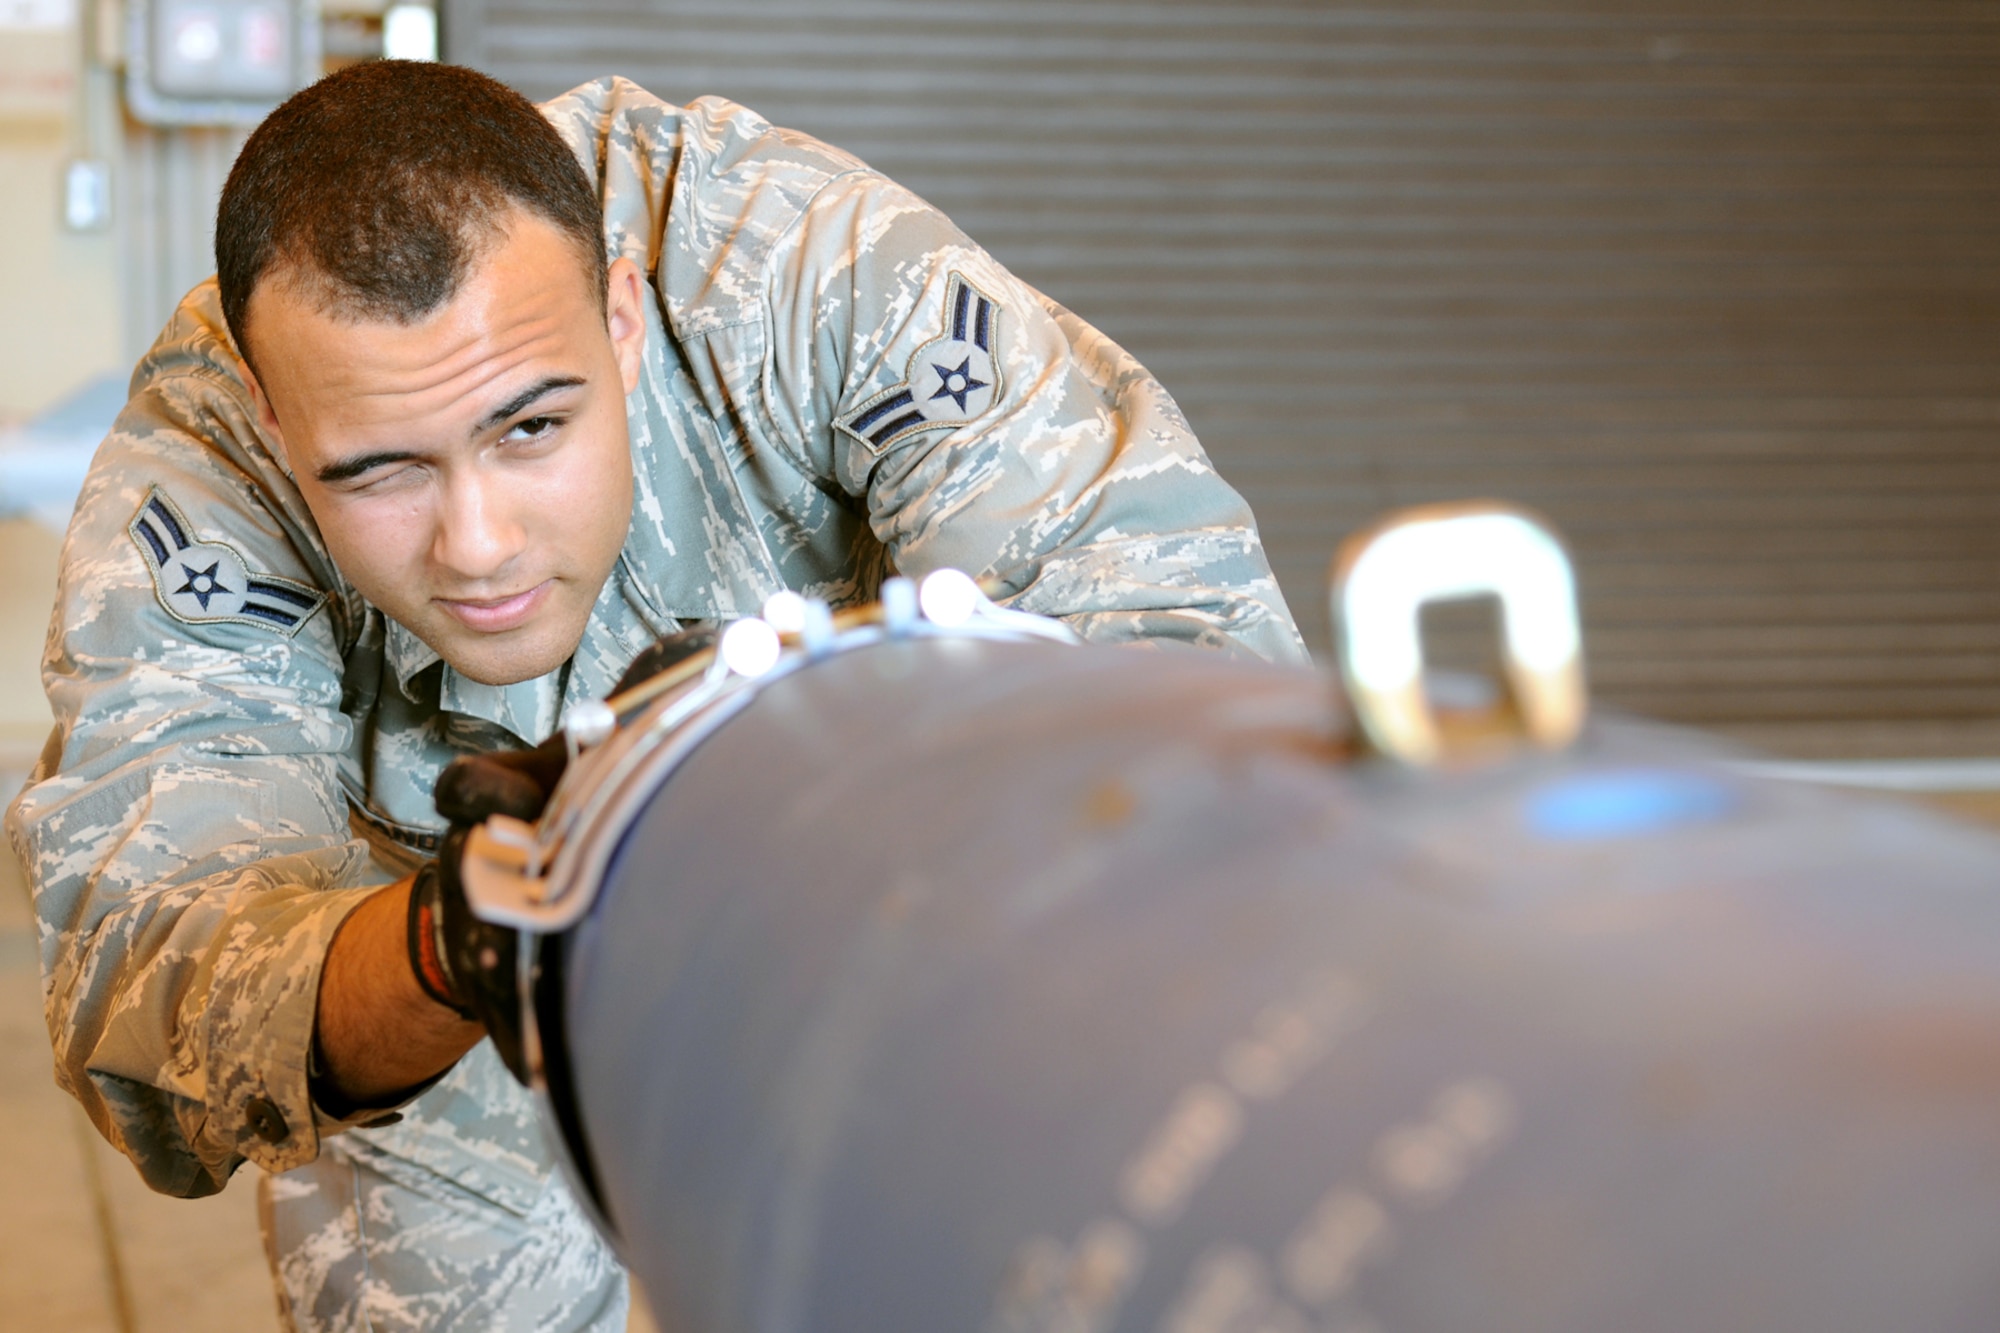 MISAWA AIR BASE, Japan -- Airman 1st Class Michael Eiland, 35th Maintenance Squadron munitions journeyman, aligns the strake assembly with suspension lugs on a GBU-38 June 9, 2009. The munitions flight builds approximately six training assets a year, but while deployed Airman Eiland, a native of Omaha, Neb., built up to 30 munitions in one day. (U.S. Air Force photo by Staff Sgt. Rachel Martinez)